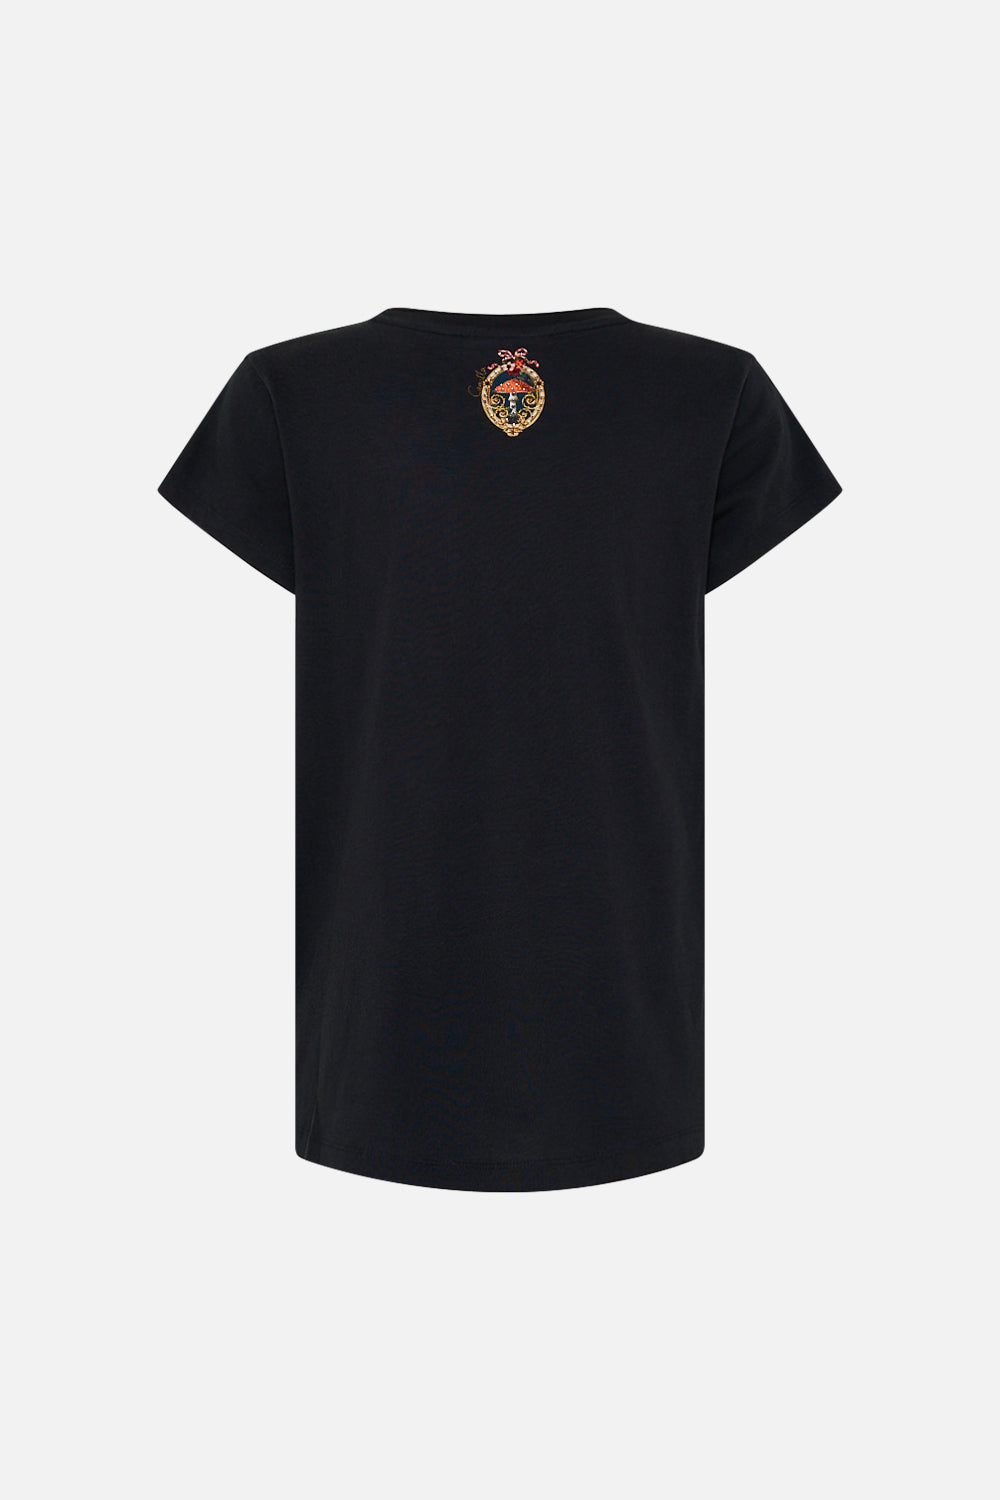 CURVED HEM FITTED TEE - BLACK TAPESTRY TOTEMS